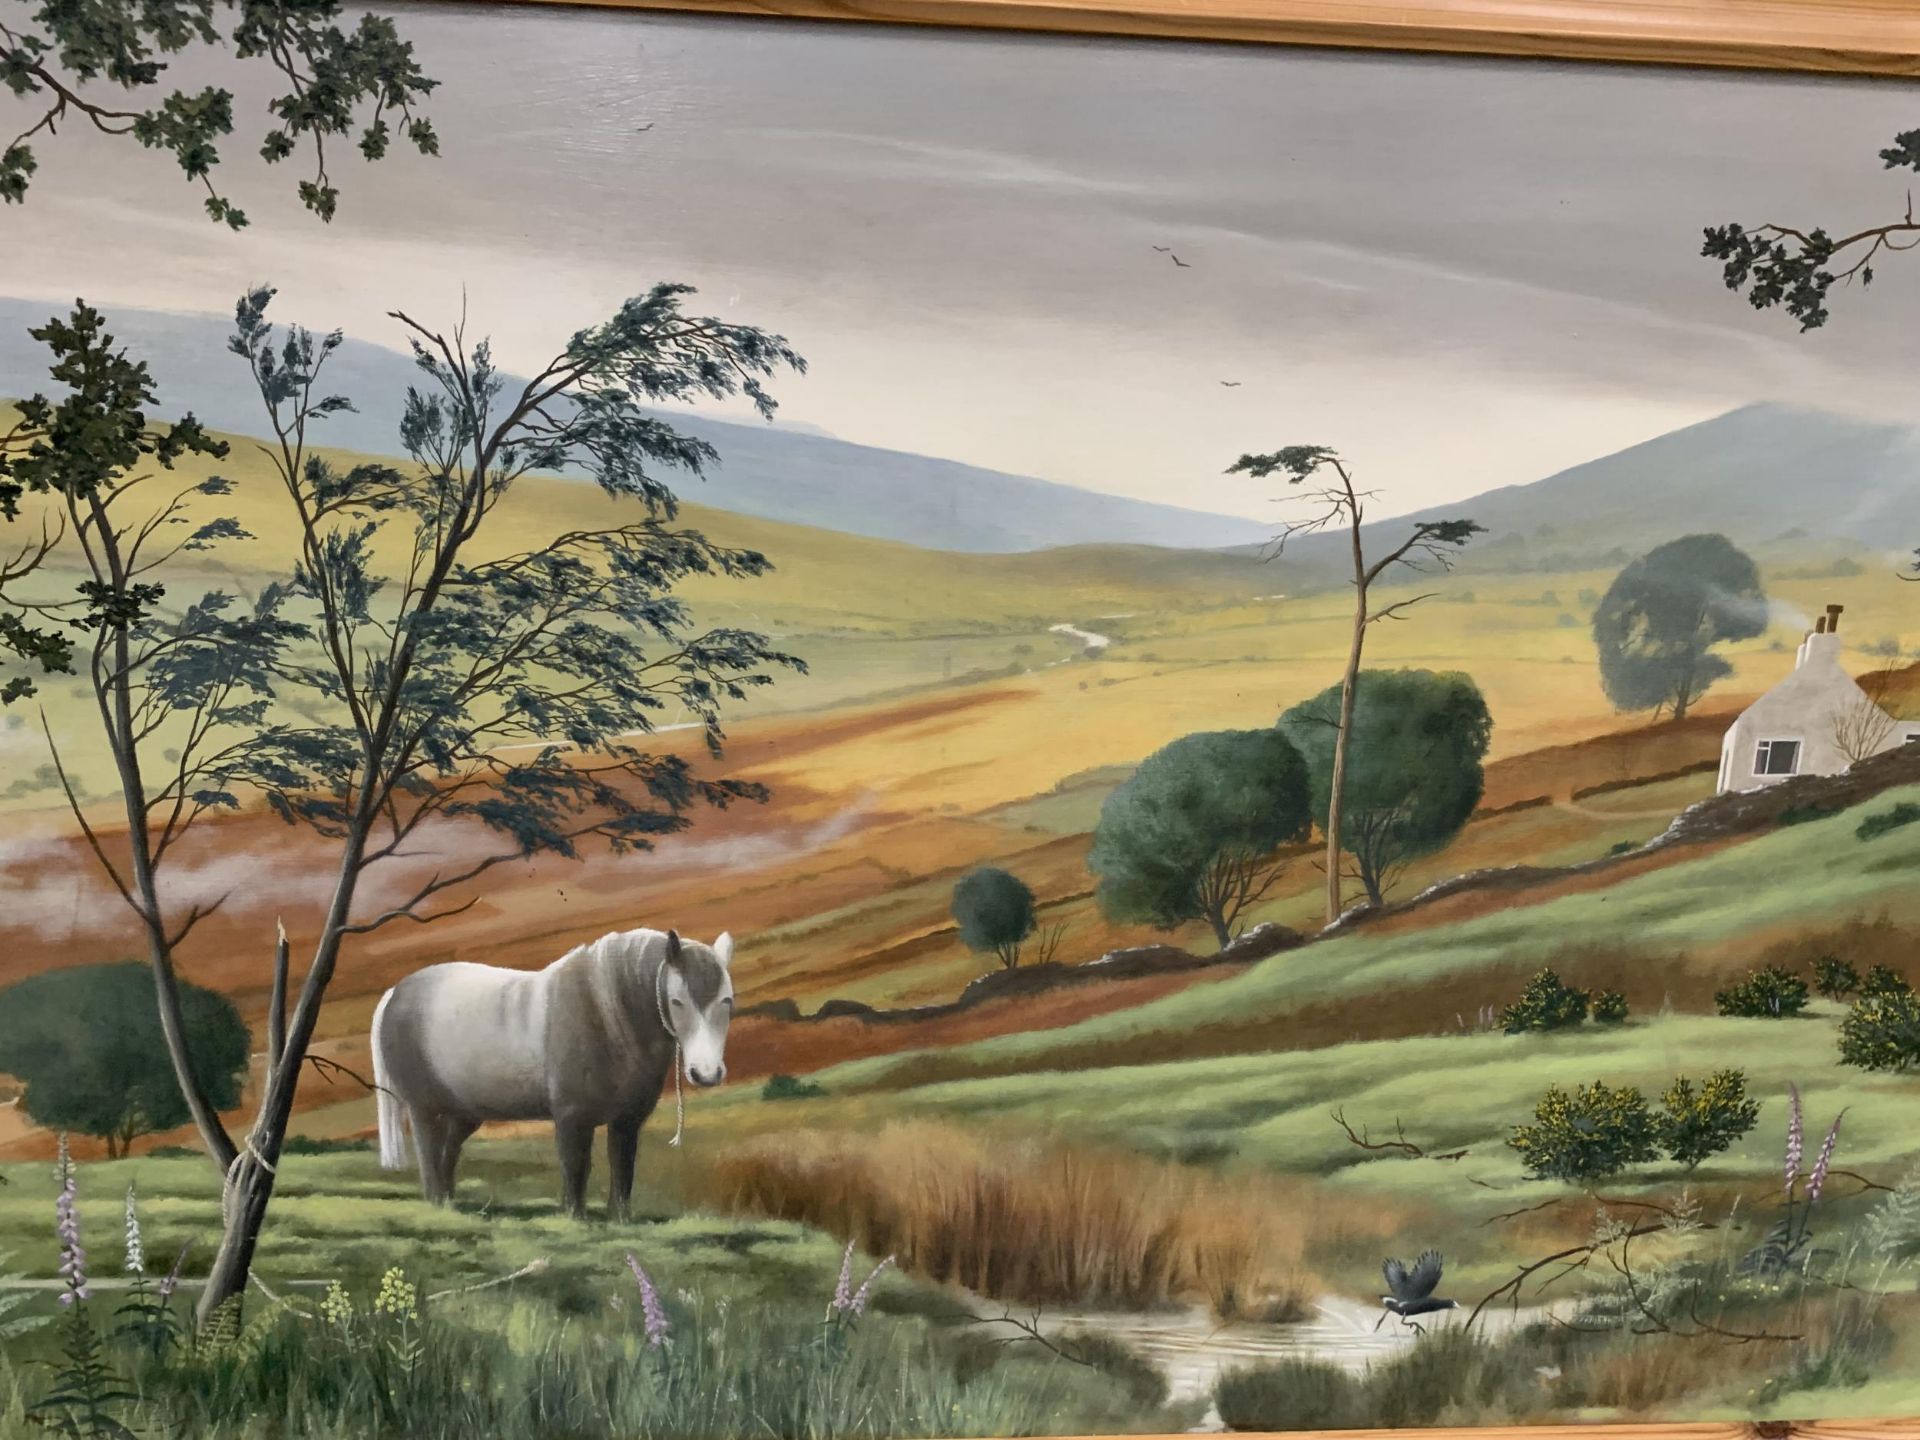 A JOESPH IORWERTH CHESTERS RCA 'UNRESTRICTED GRAZING' PAINTING OF HORSES IN A FIELD, 1983 - Image 2 of 3